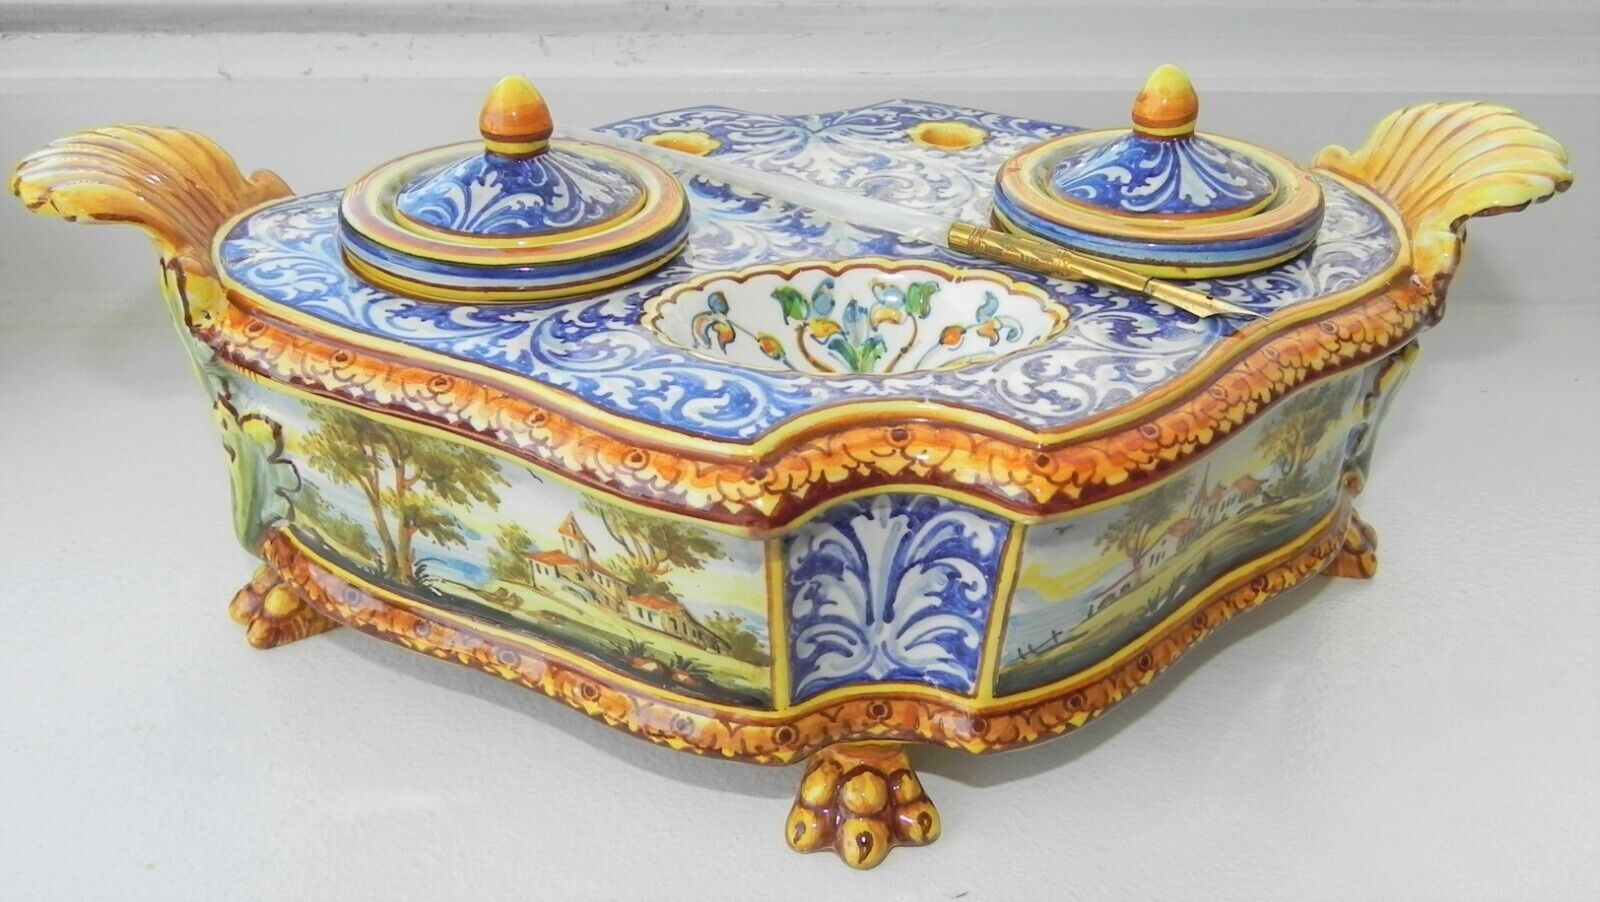 Vintage French Italian Porcelain Faience Hand painted Inkwell + Quill Pen 19th C